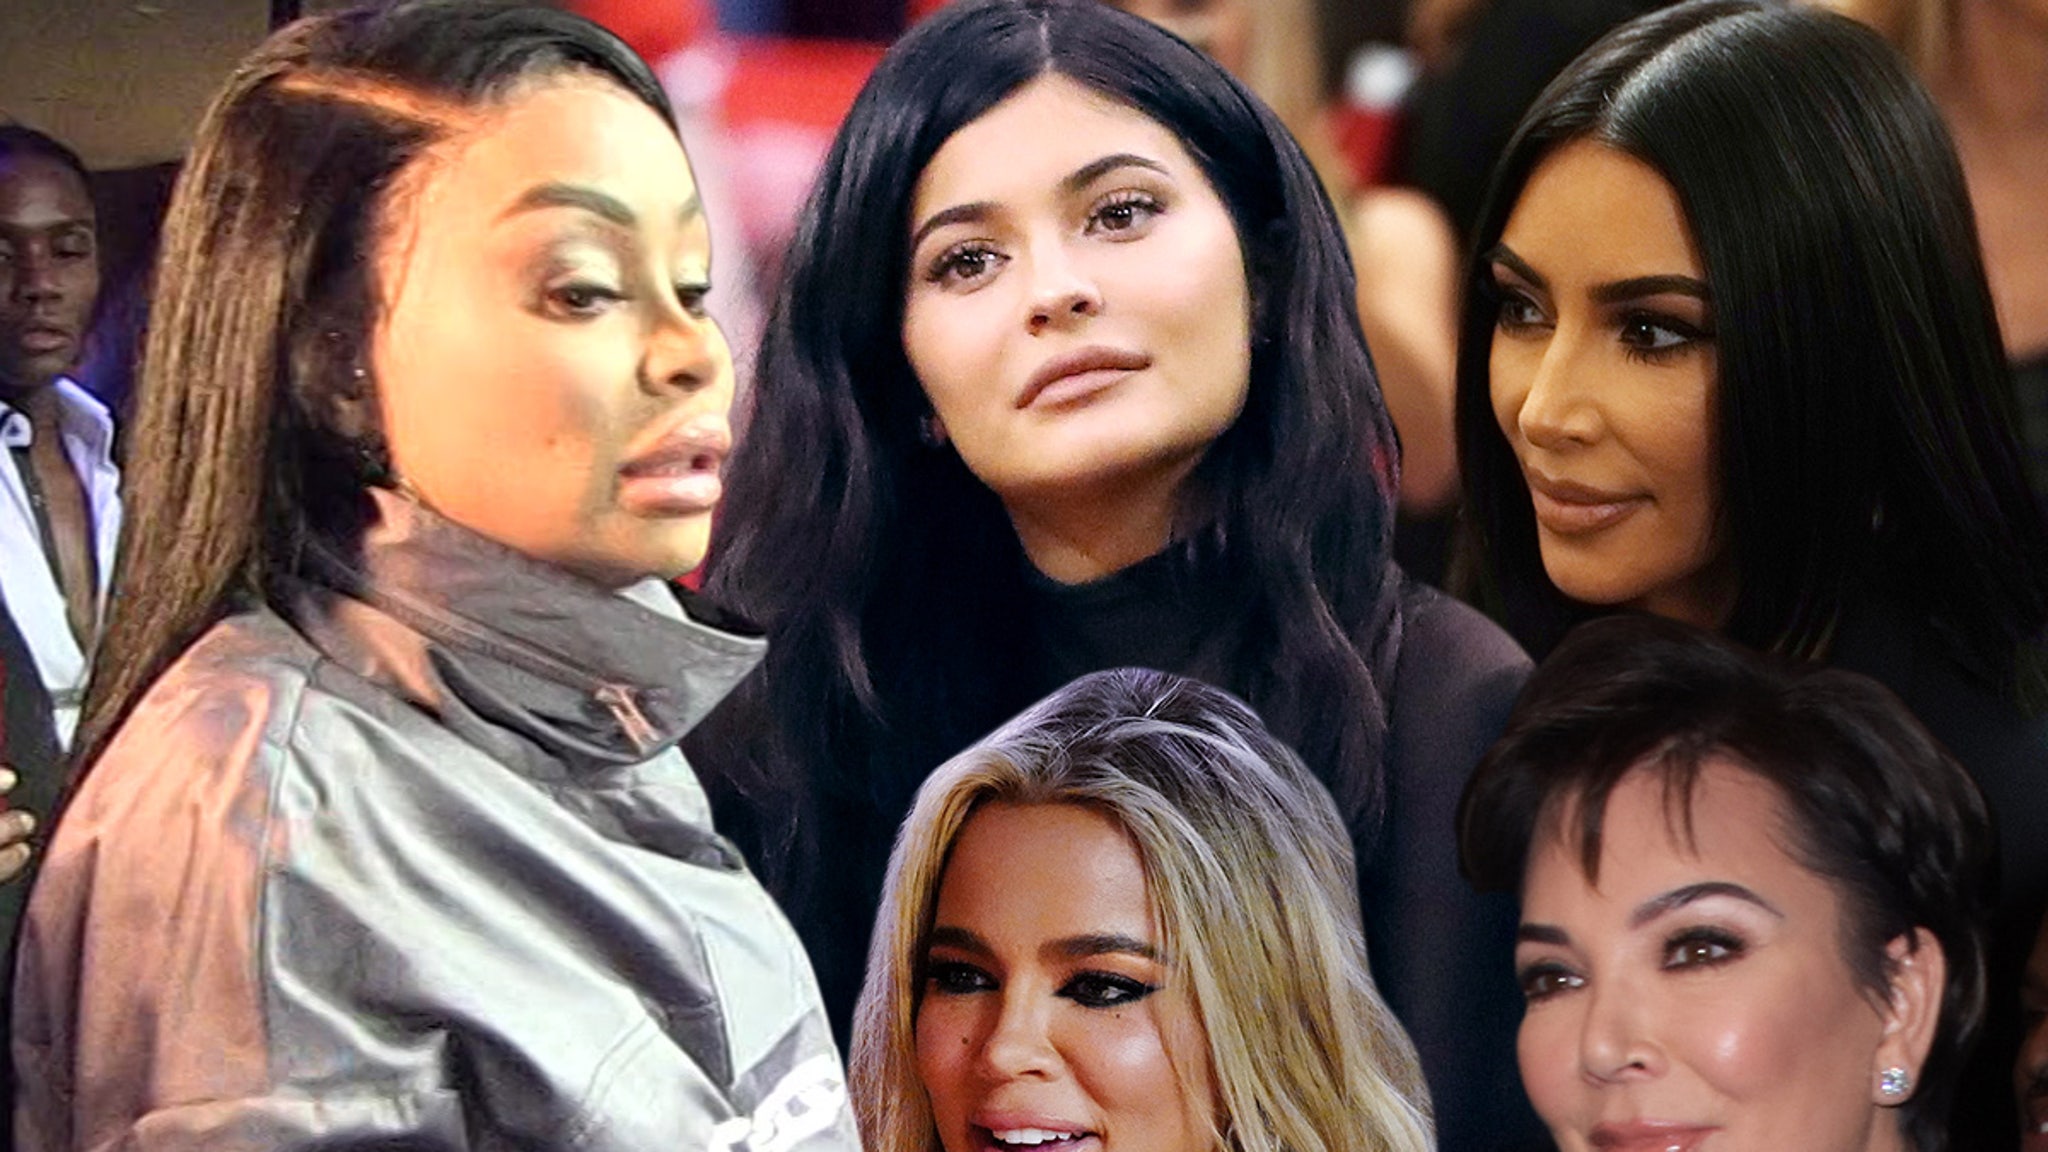 Blac Chyna Loses a Second Round in Case Against Kardashians After Claiming Bias